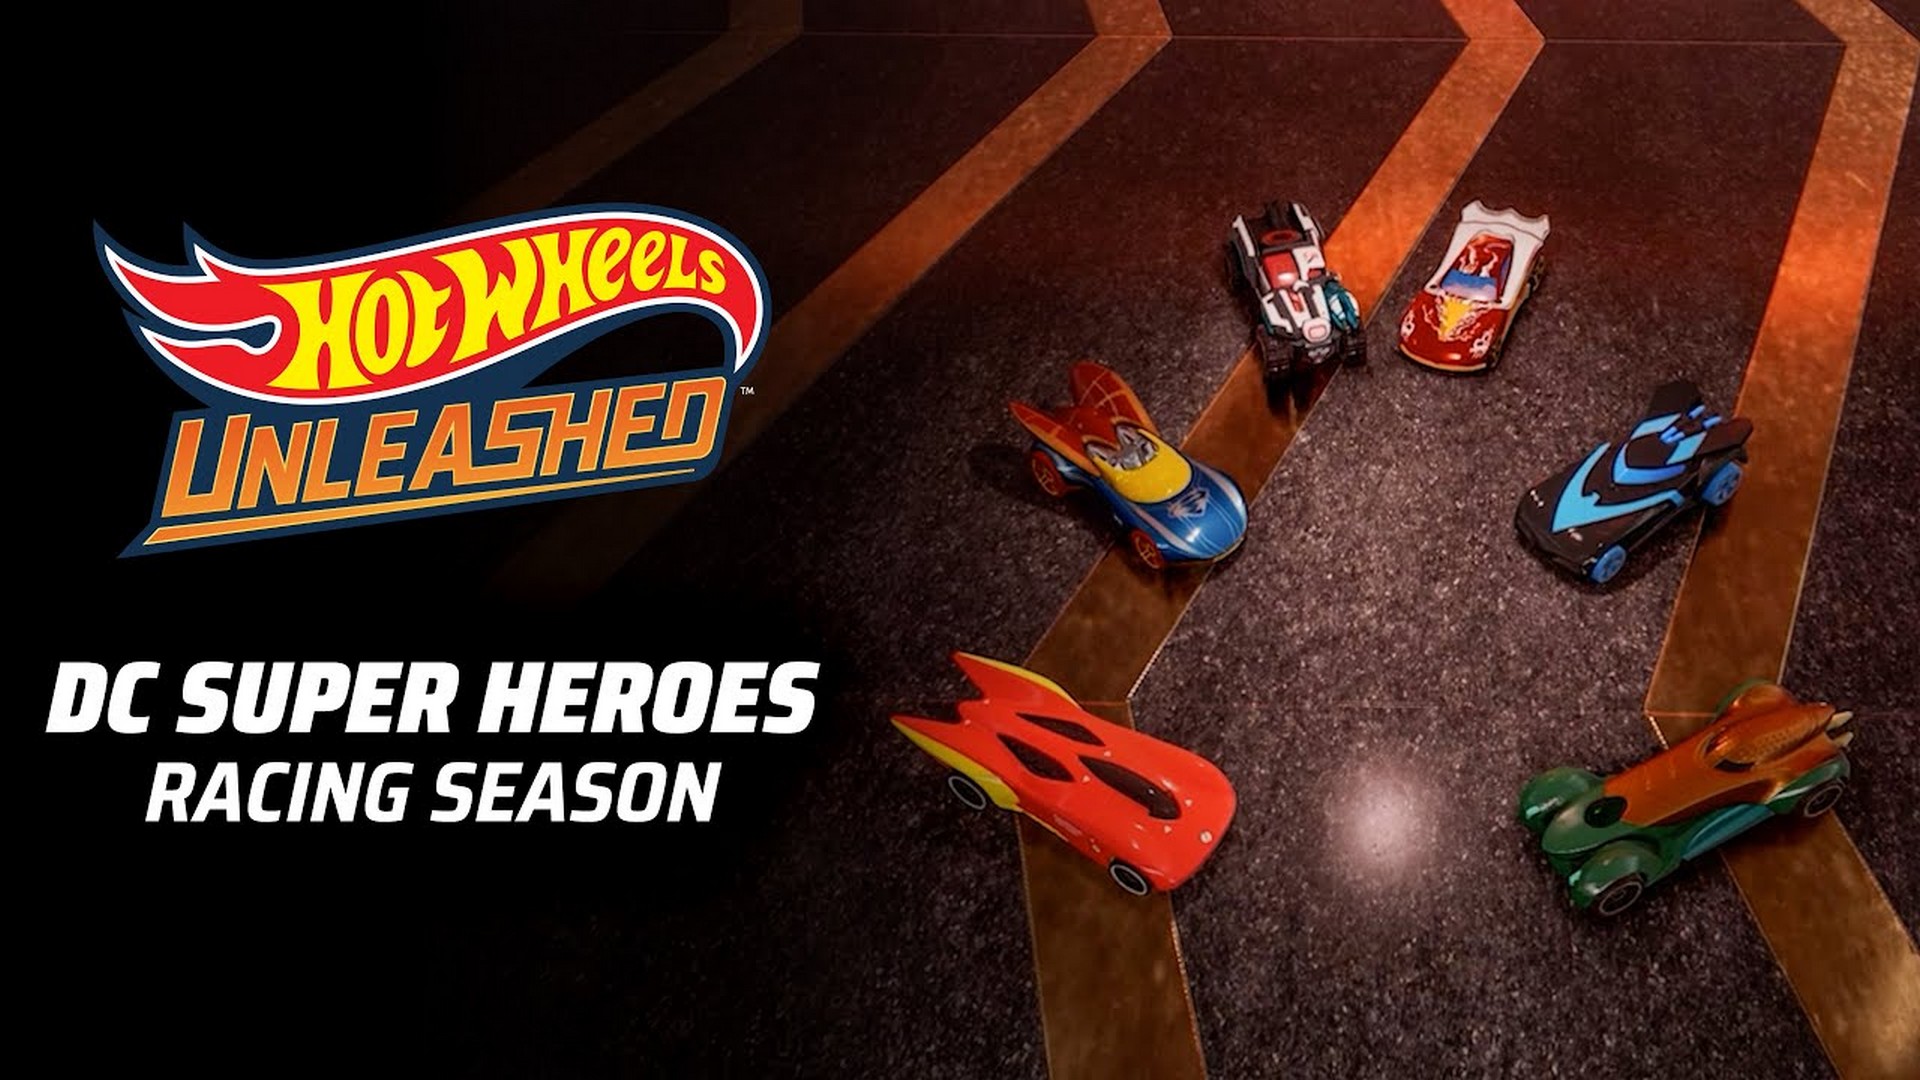 The DC Super Heroes Racing Season For Hot Wheels Unleashed Available Now from Mattel & Milestone SRL